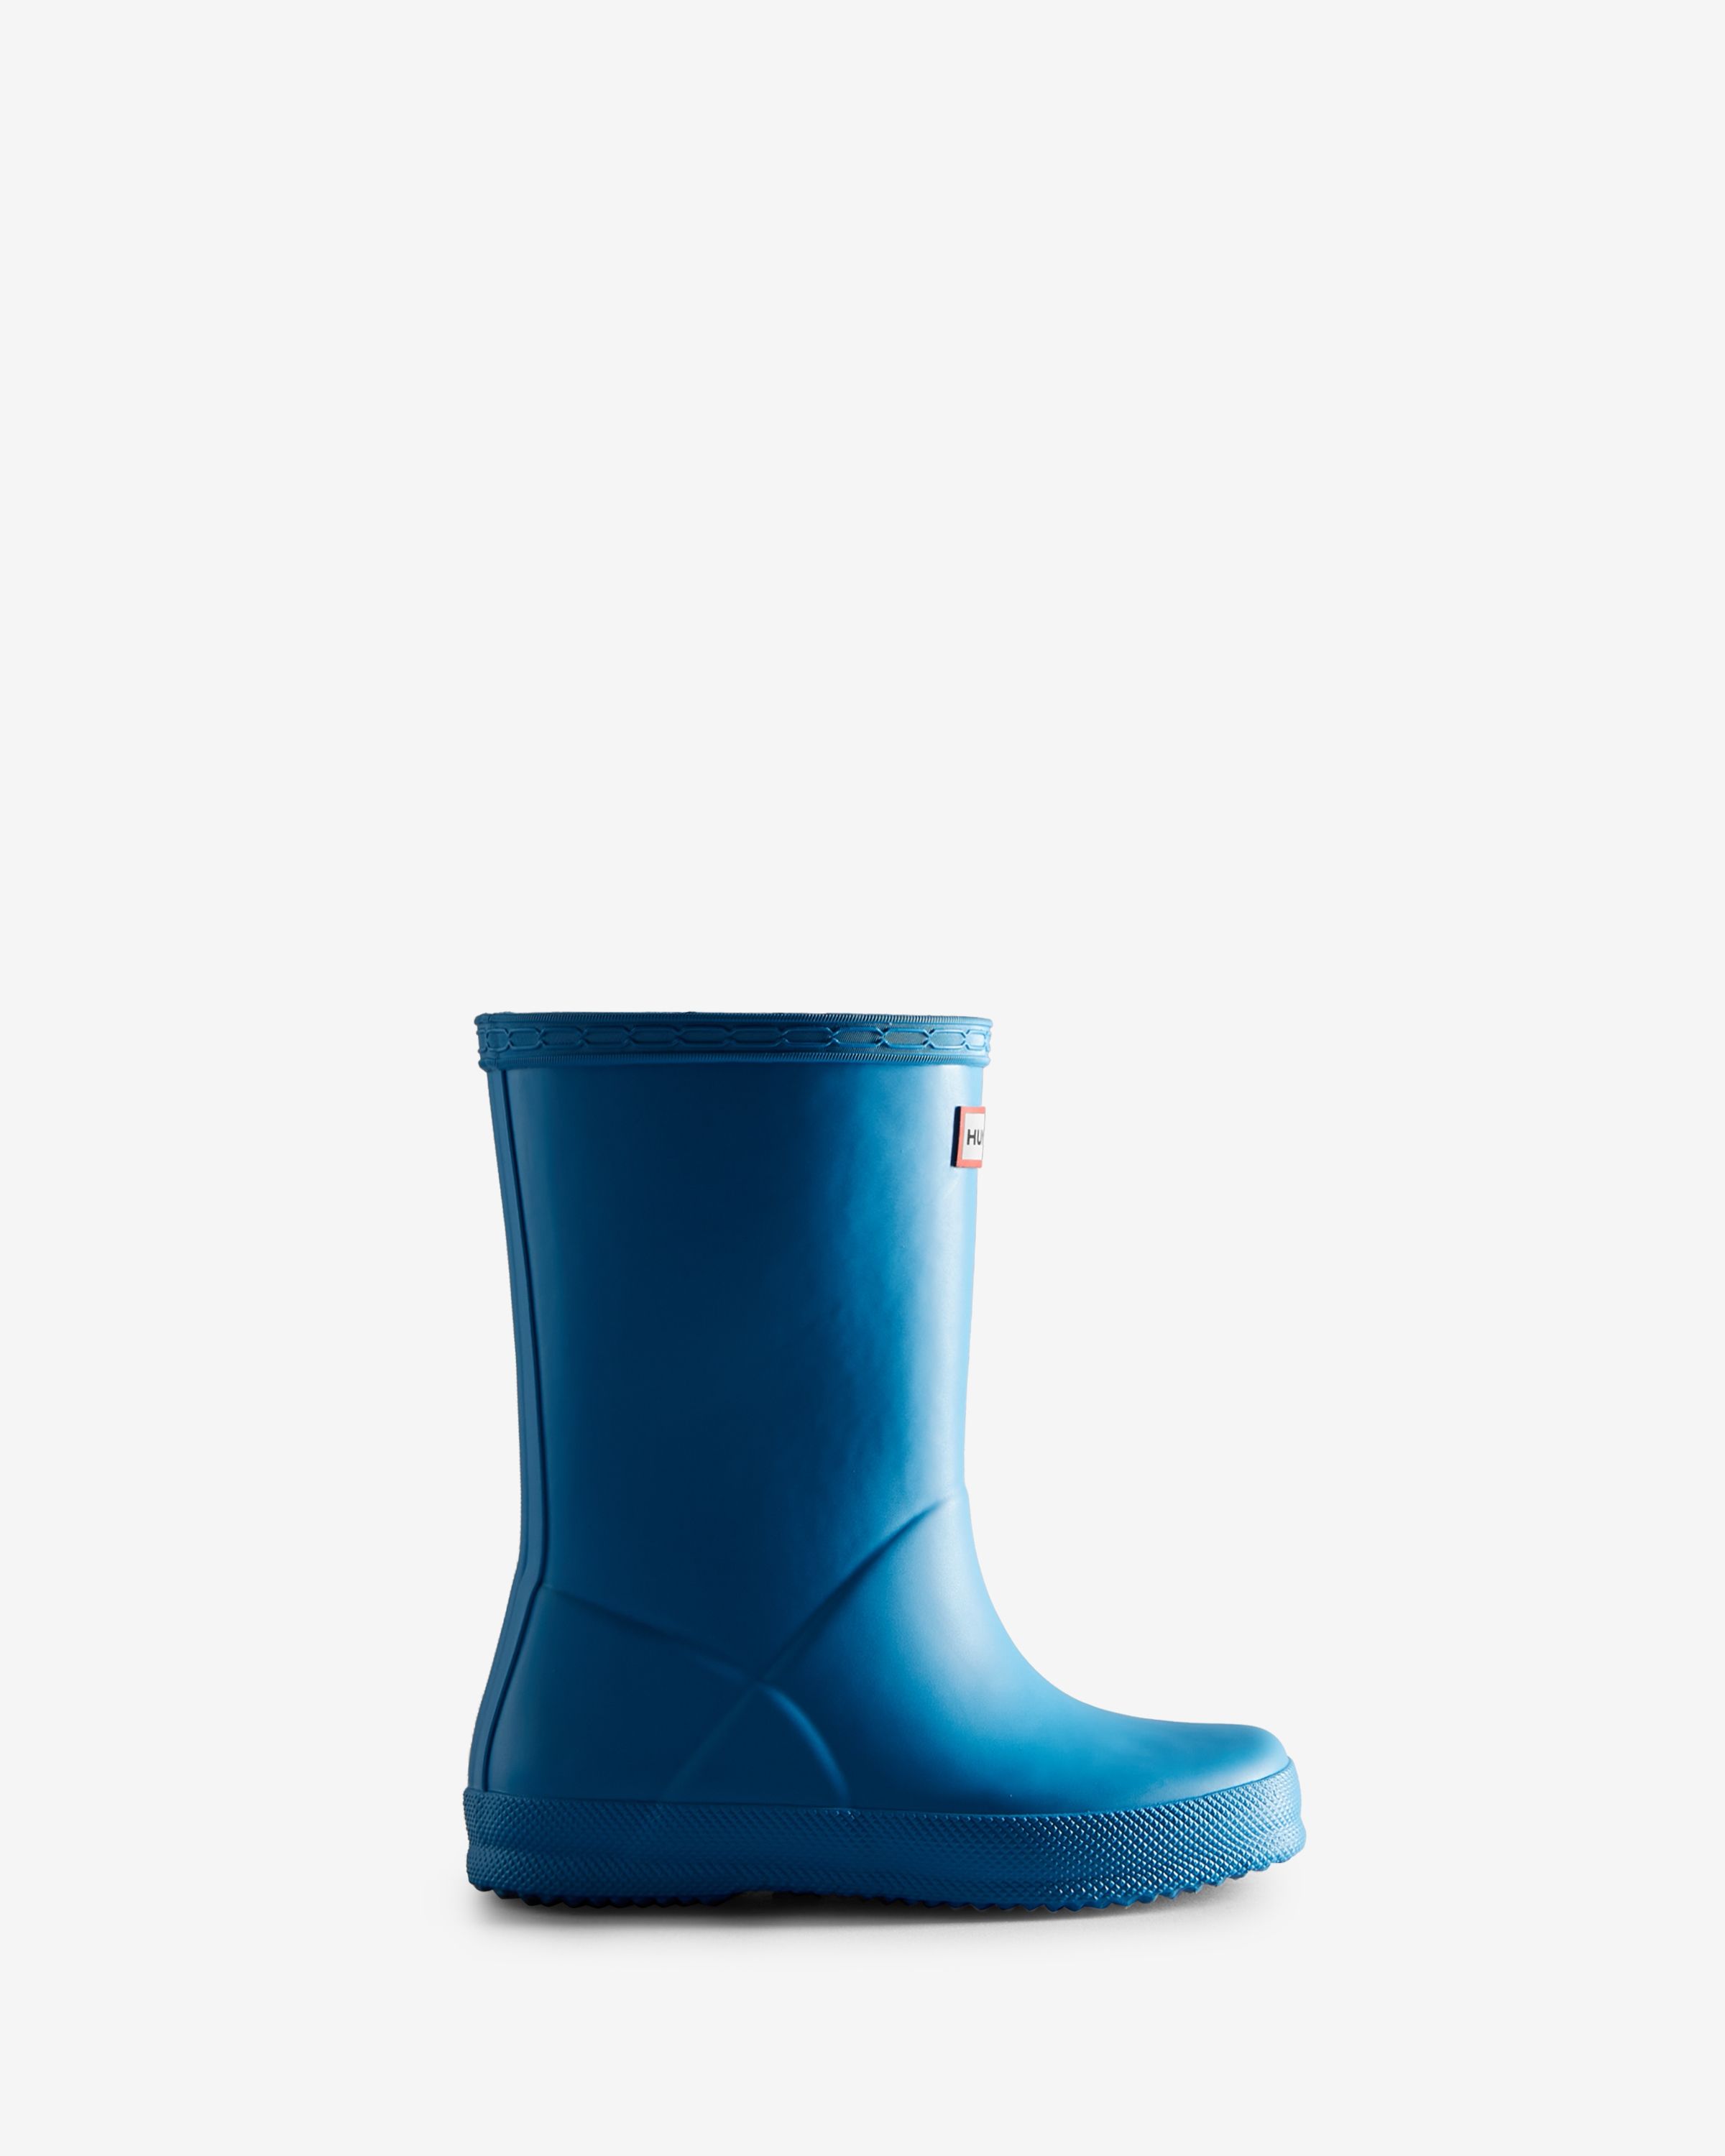 Original Kids First (18 Months-8 Years) Rain Boots | Hunter (US and CA)